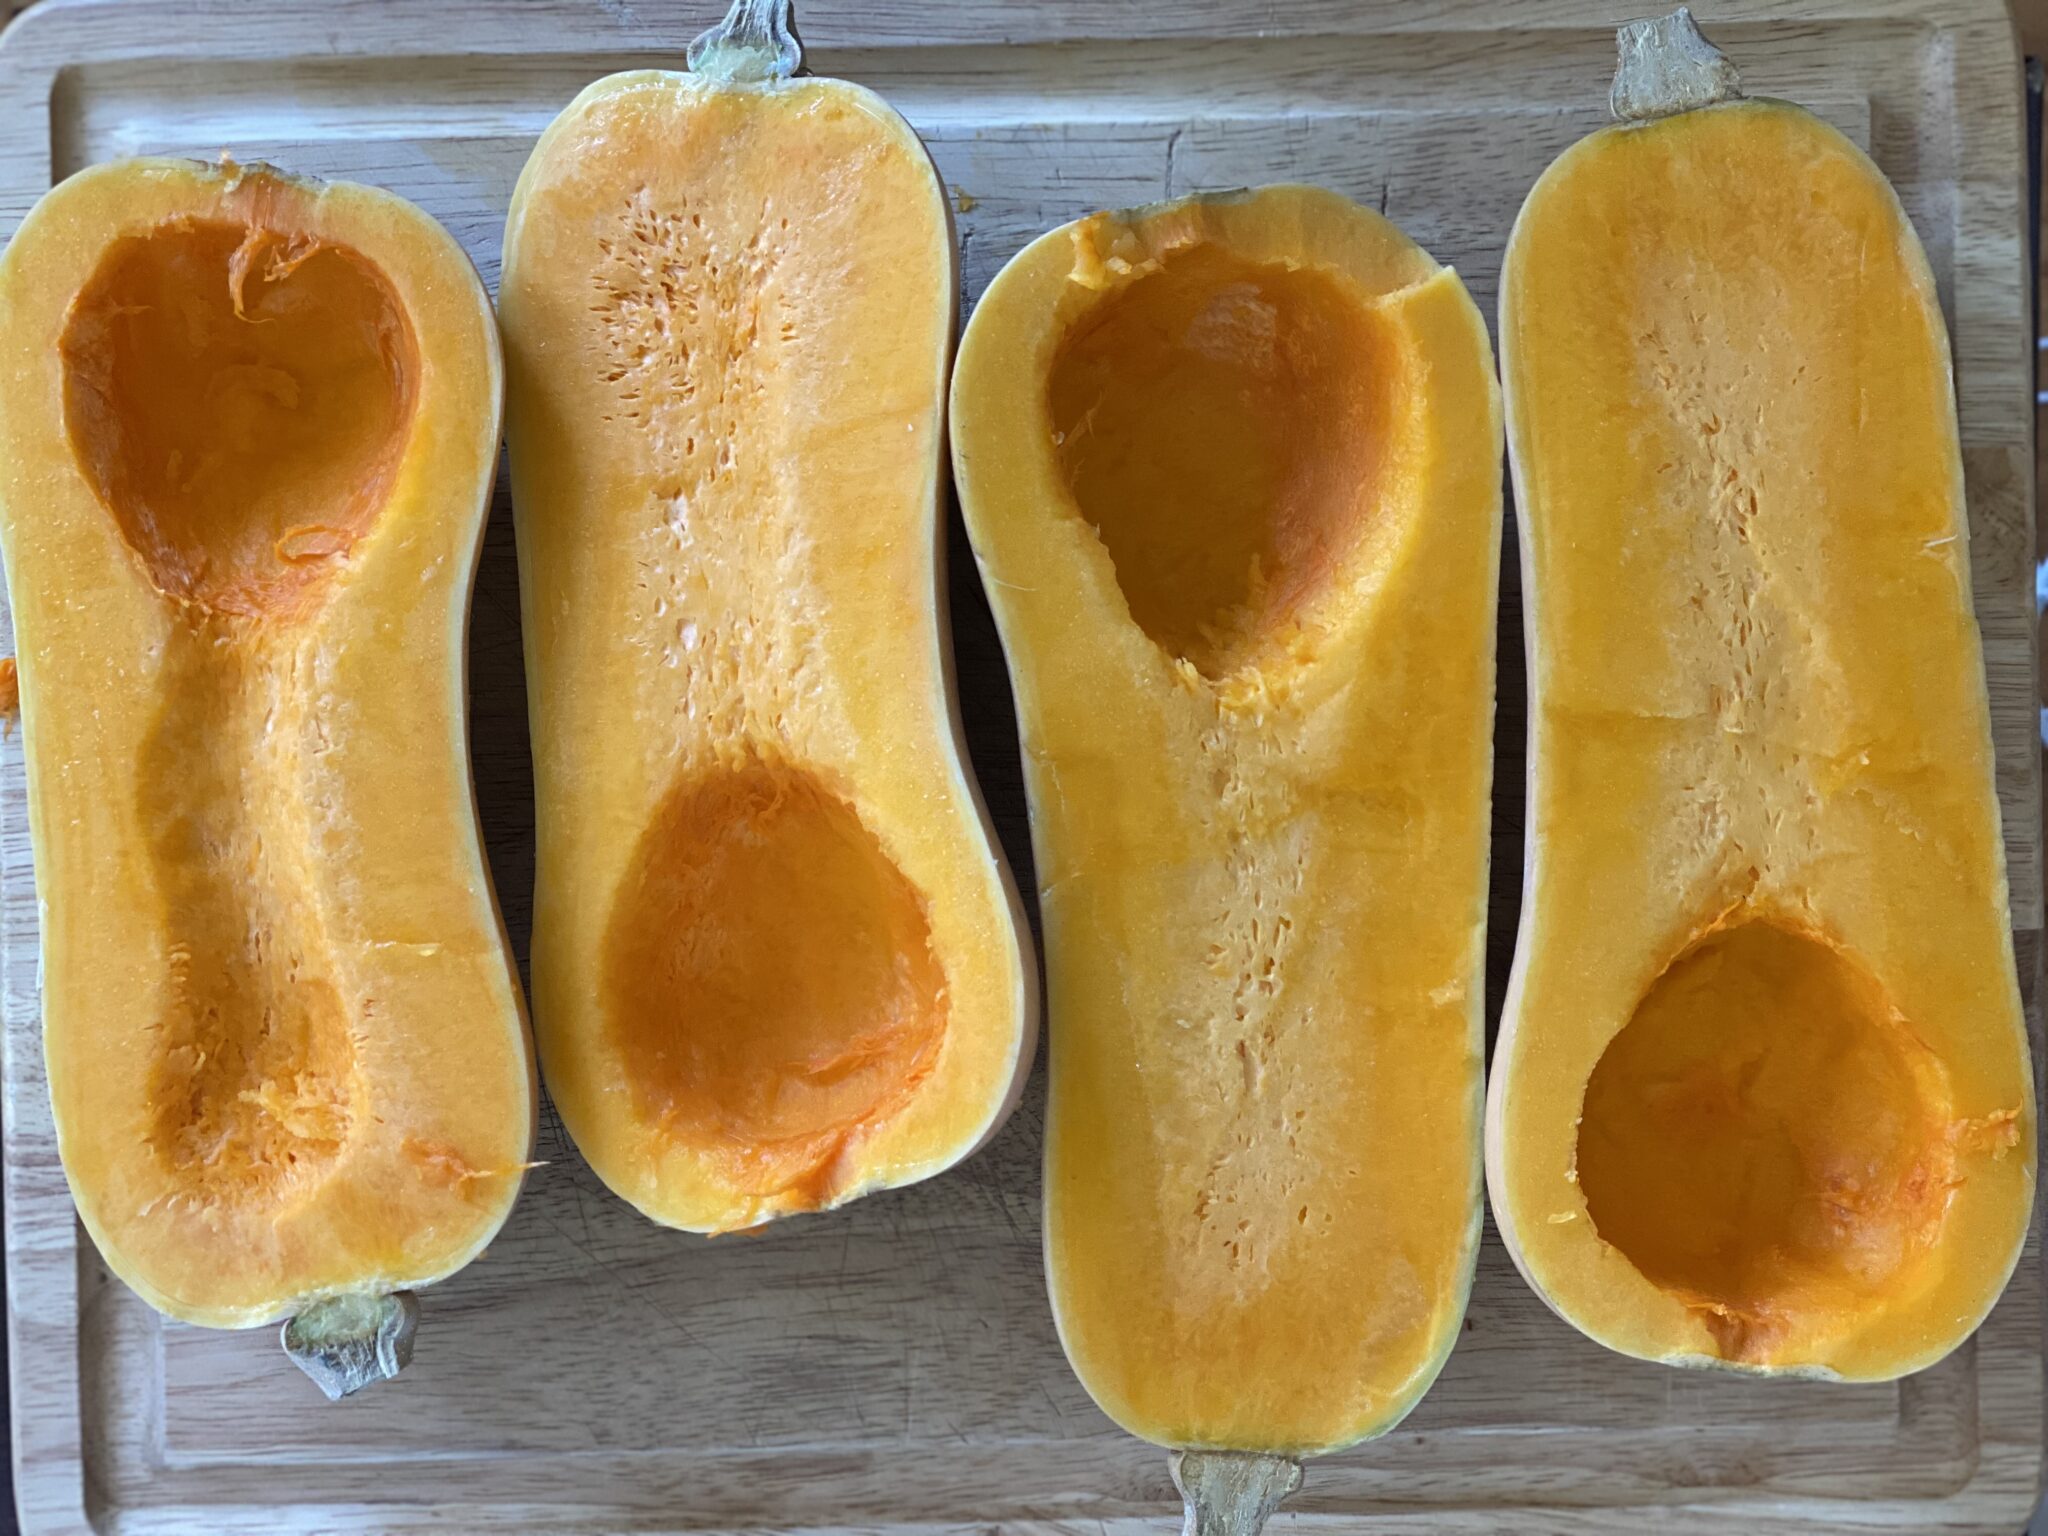 2 butternut squashes sliced in half and seeds removed